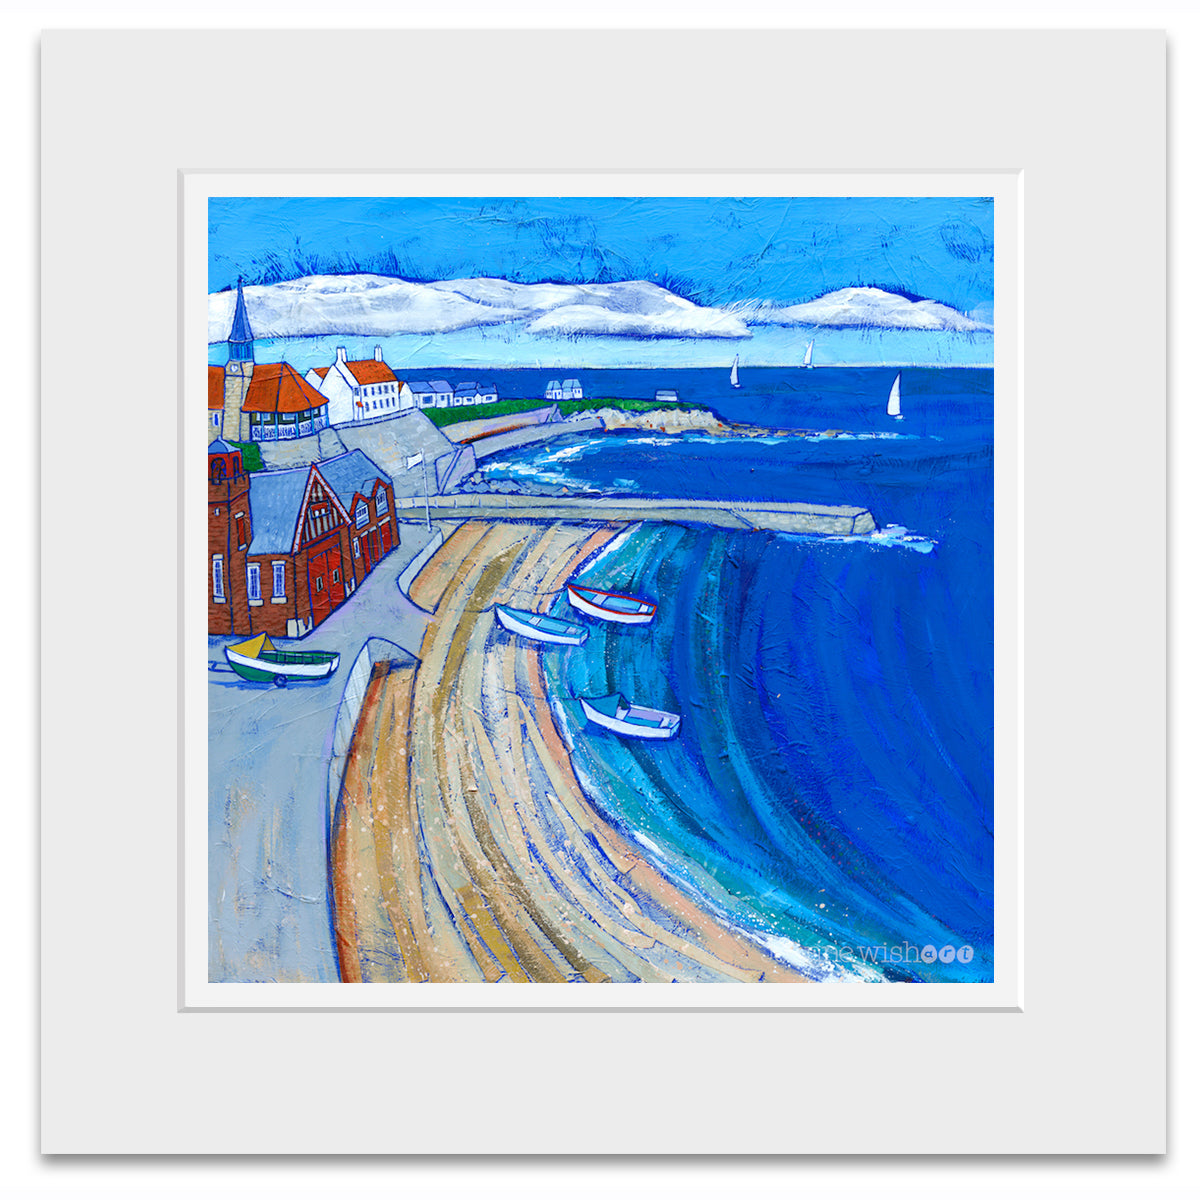 A mounted art print of Culelrcoats Bay featuring the RNLI lifeboat station and a cluster of coble boats.